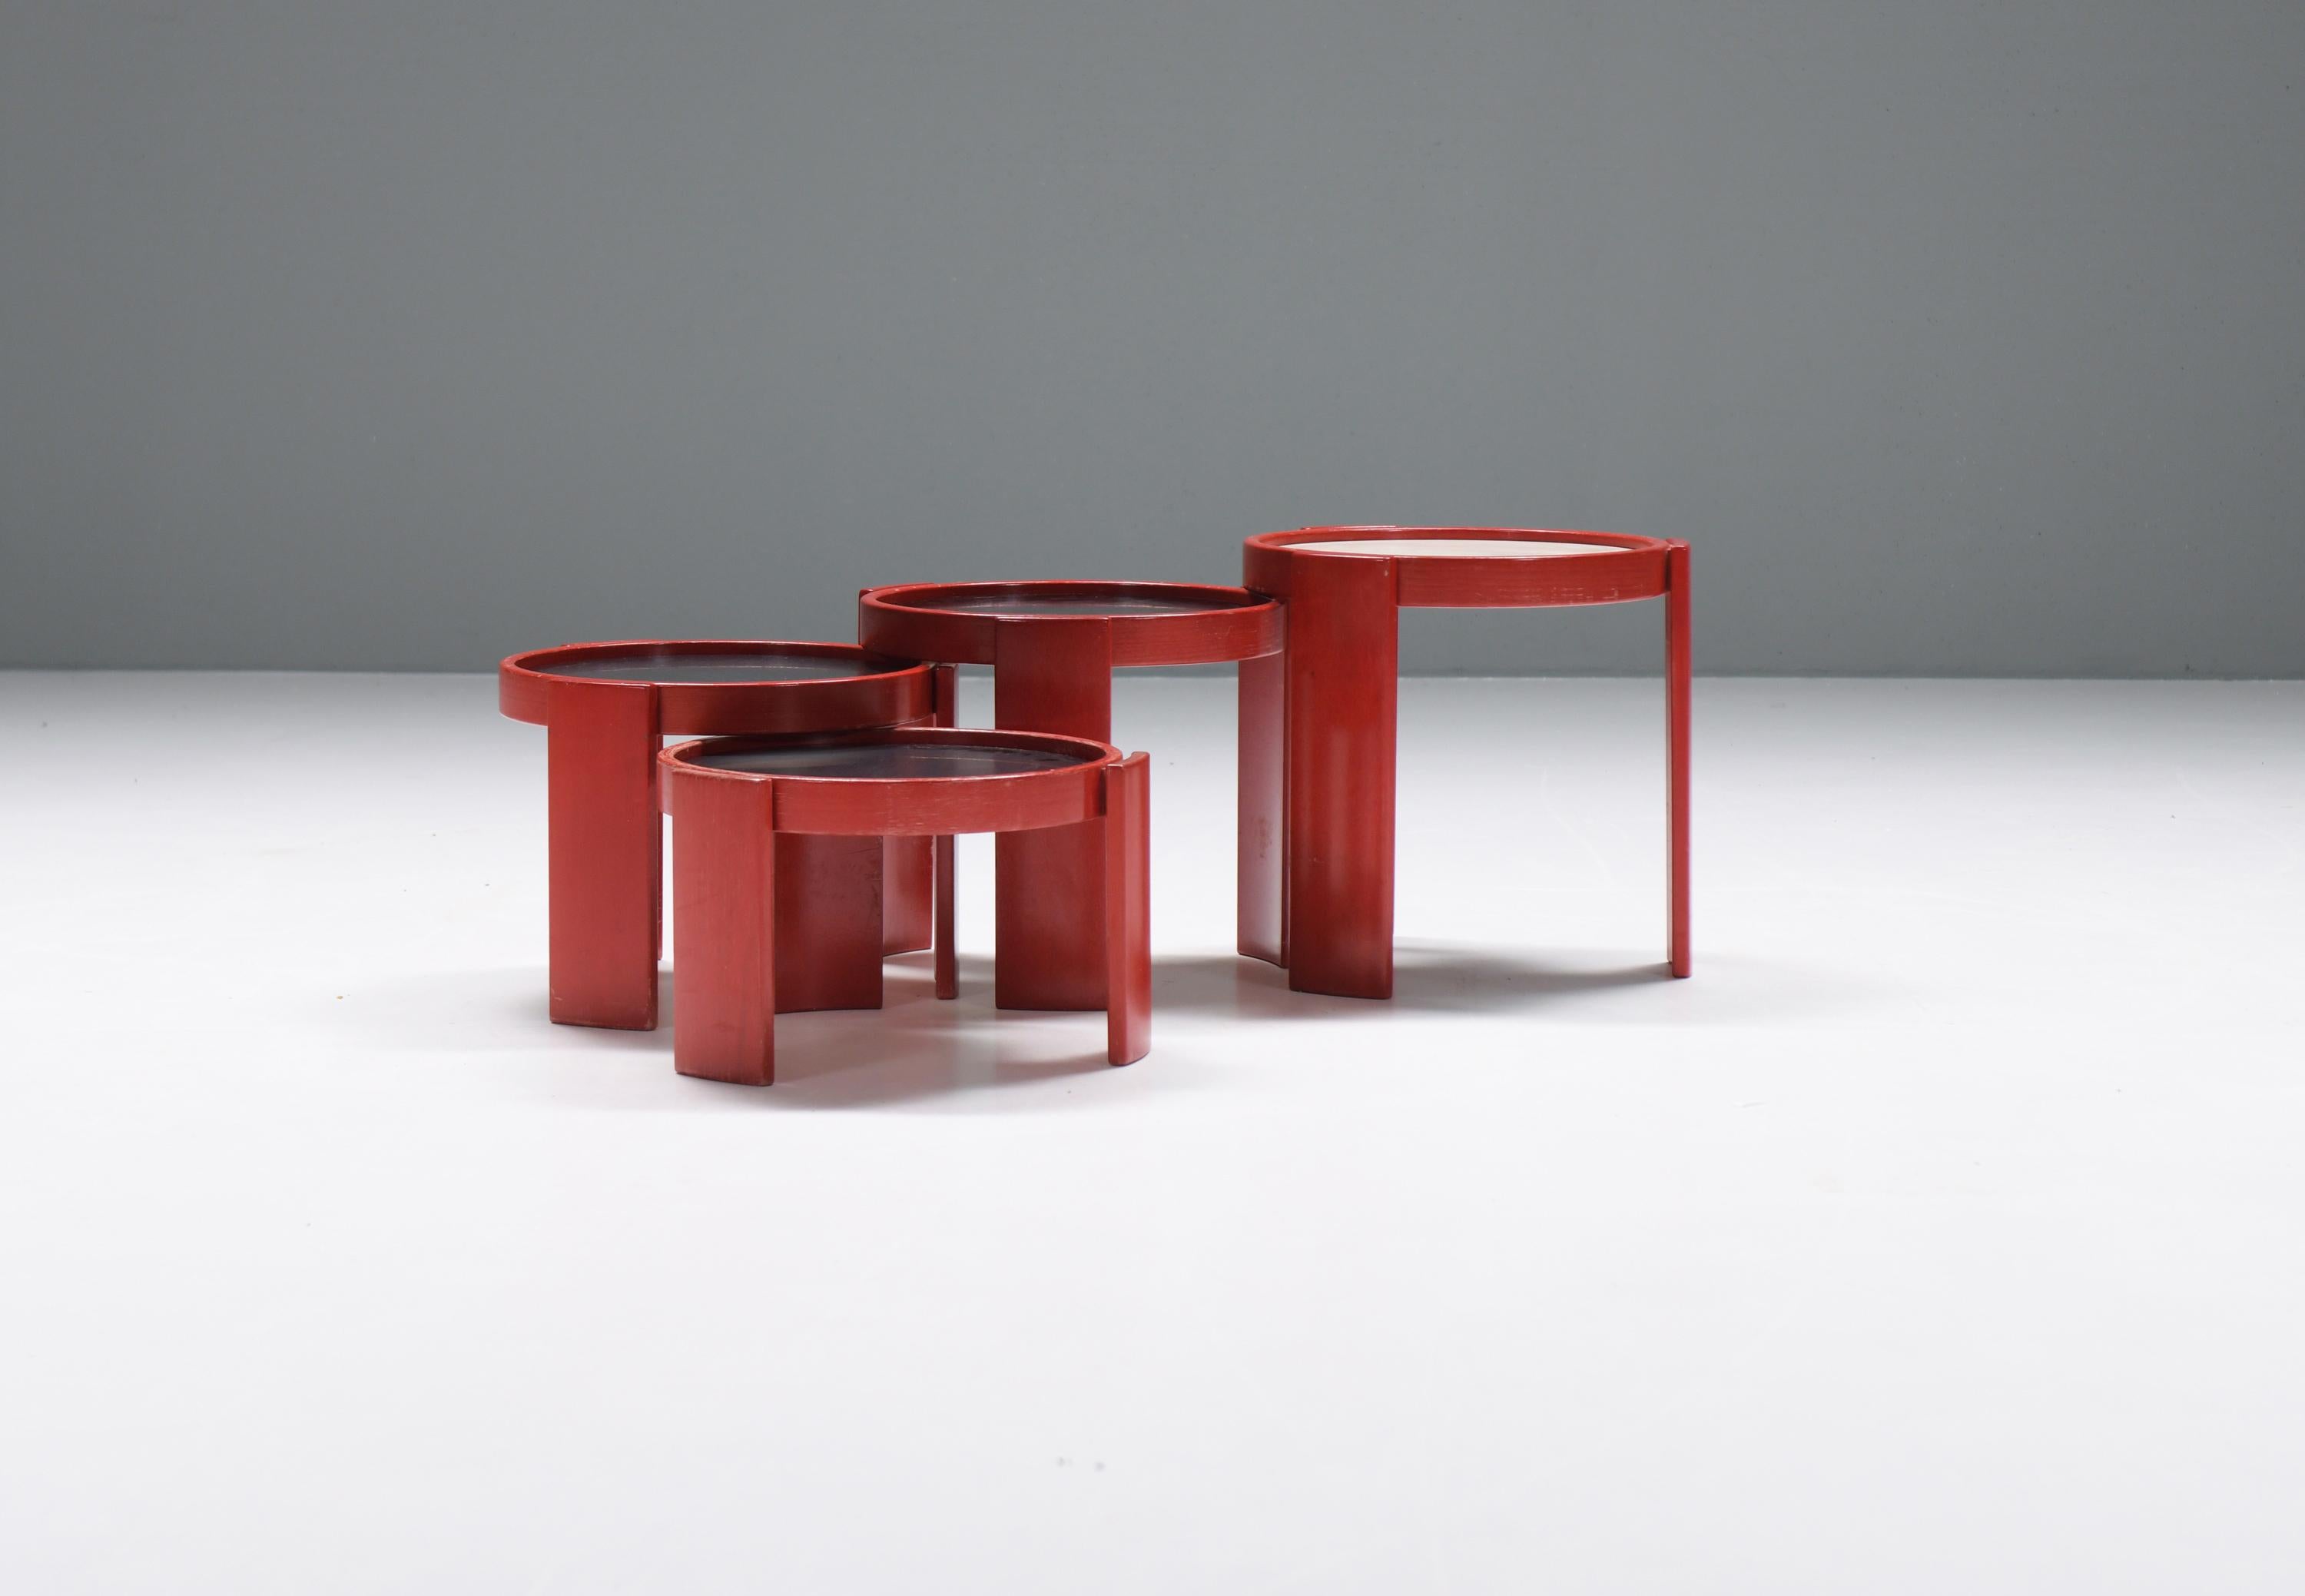 Stunning nesting tables (model 780) by Gianfranco Frattini for Cassina, 1960s.  Still 100% original in a very rare red color.
Designed by Gianfranco Frattini for CASSINA

4 modular stackable tables model 780 designed by Gianfranco Frattini for